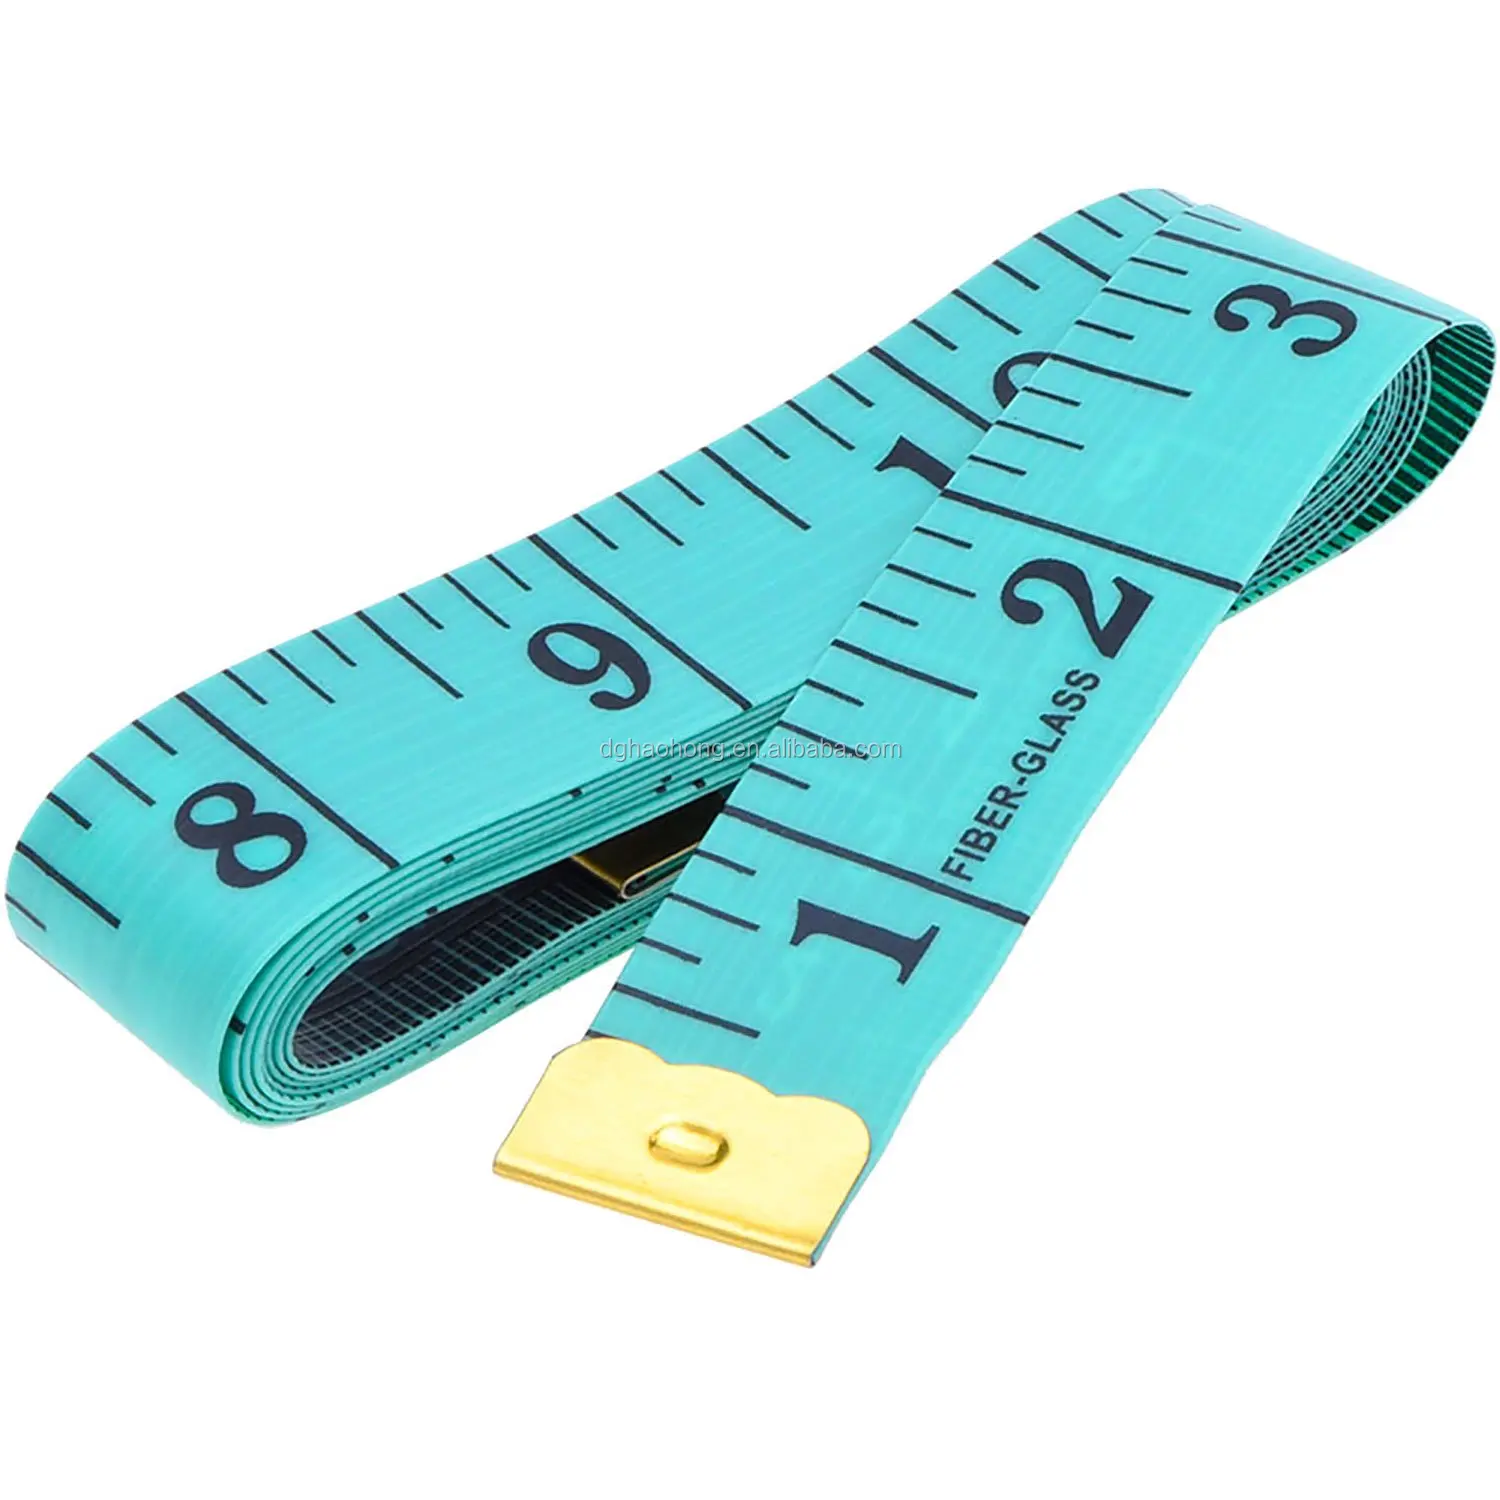 Cloth Measuring Tapes